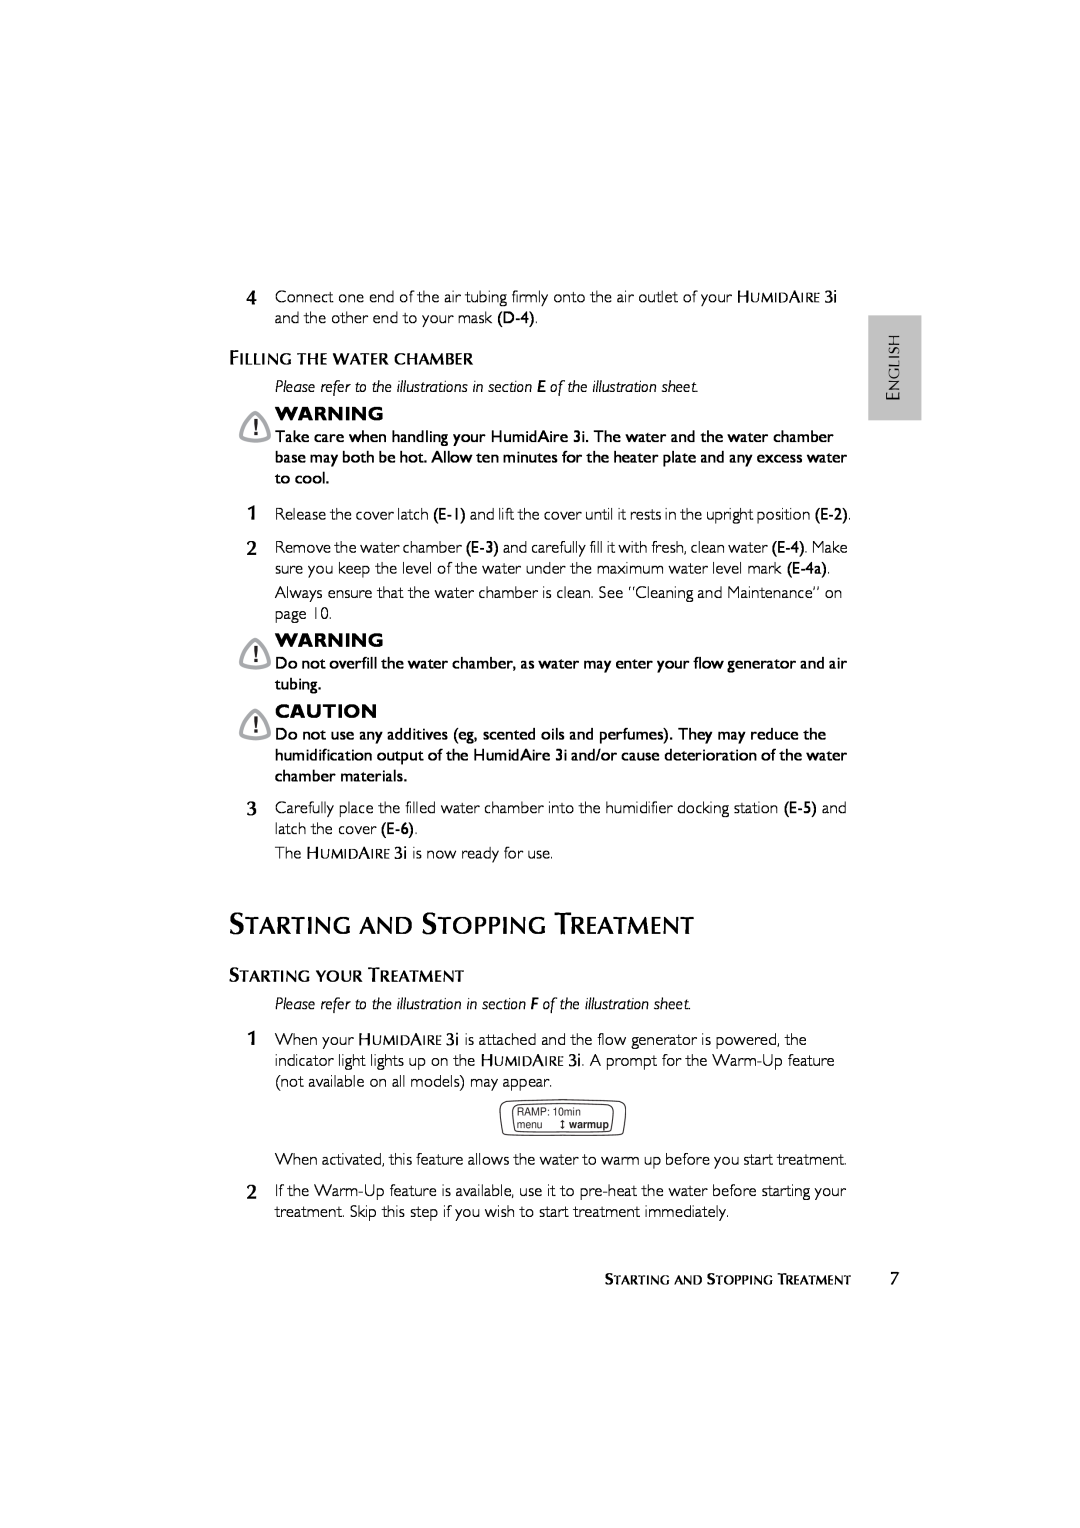 ResMed 3I user manual Starting And Stopping Treatment 